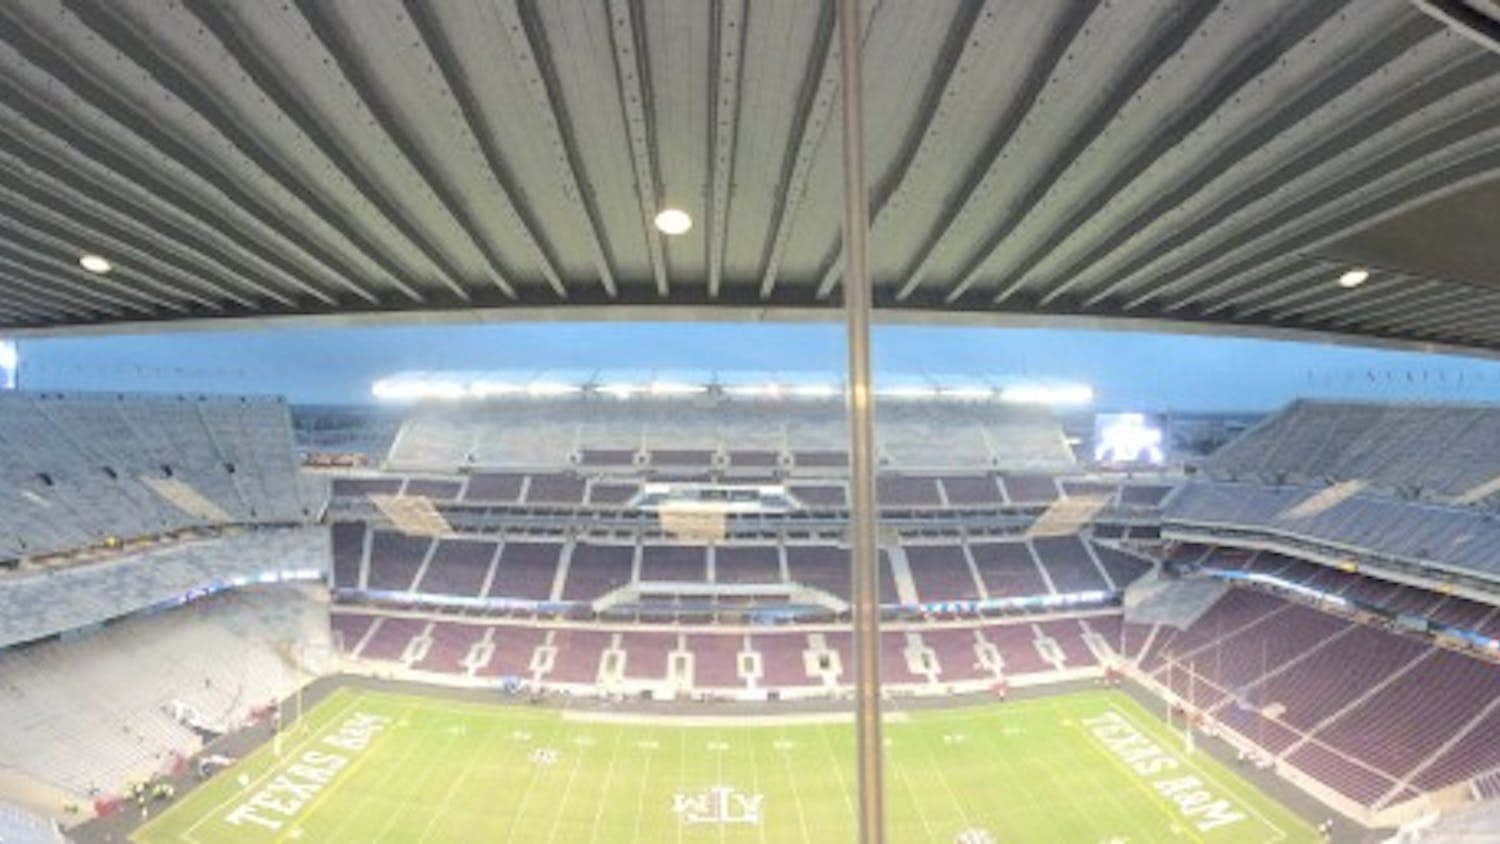 Kyle Field- College Station, Texas